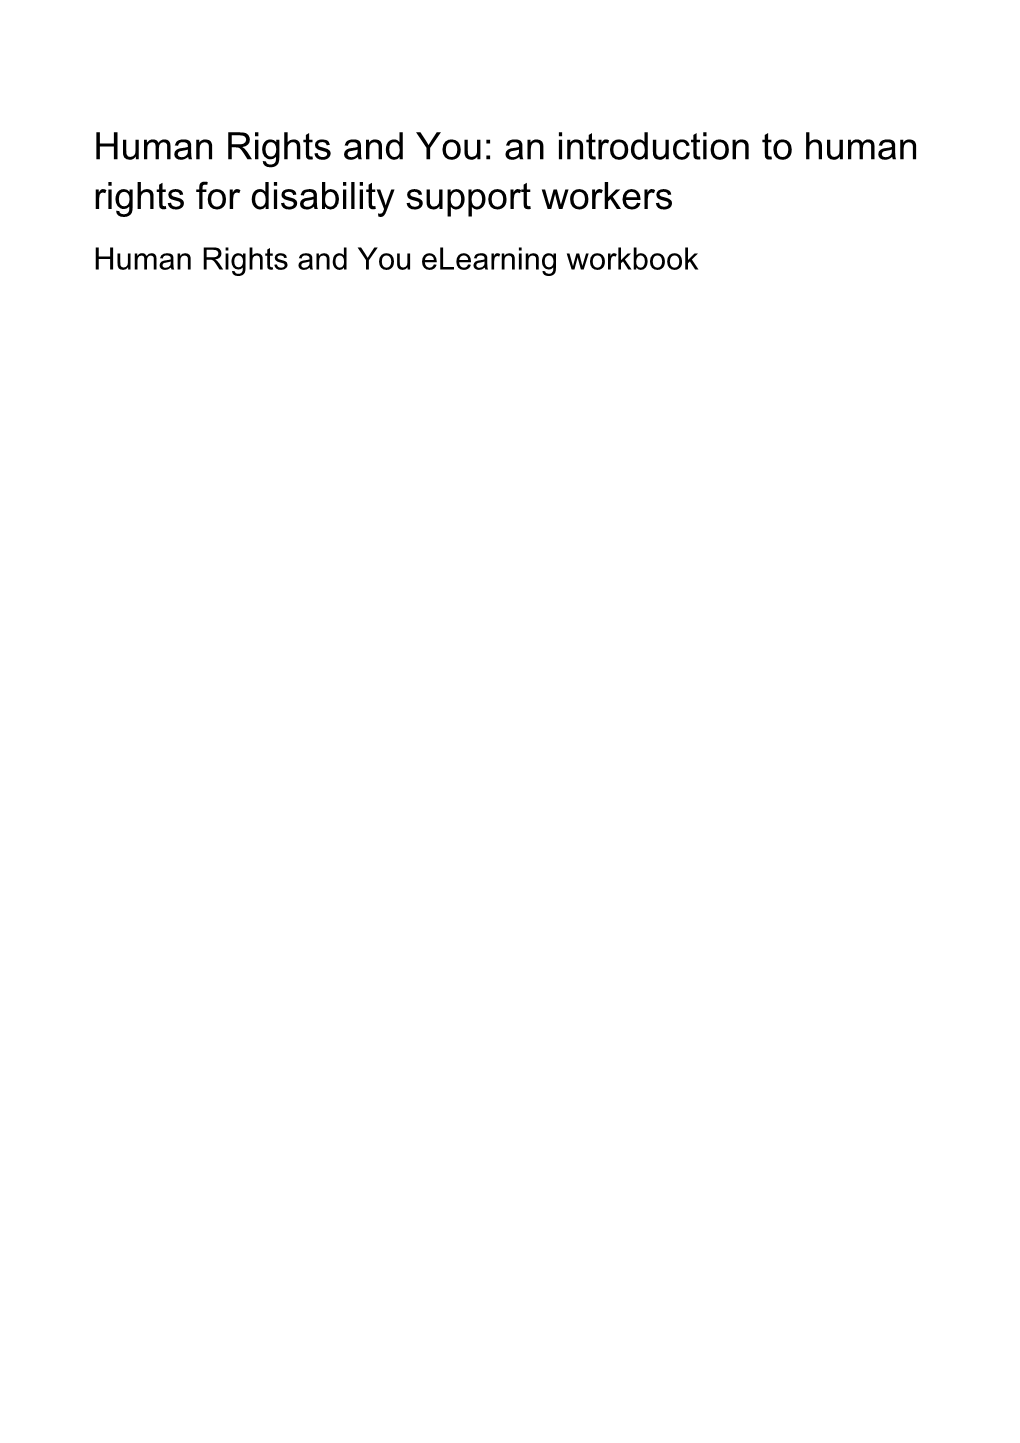 Human Rights and You: an Introduction to Human Rights for Disability Support Workers